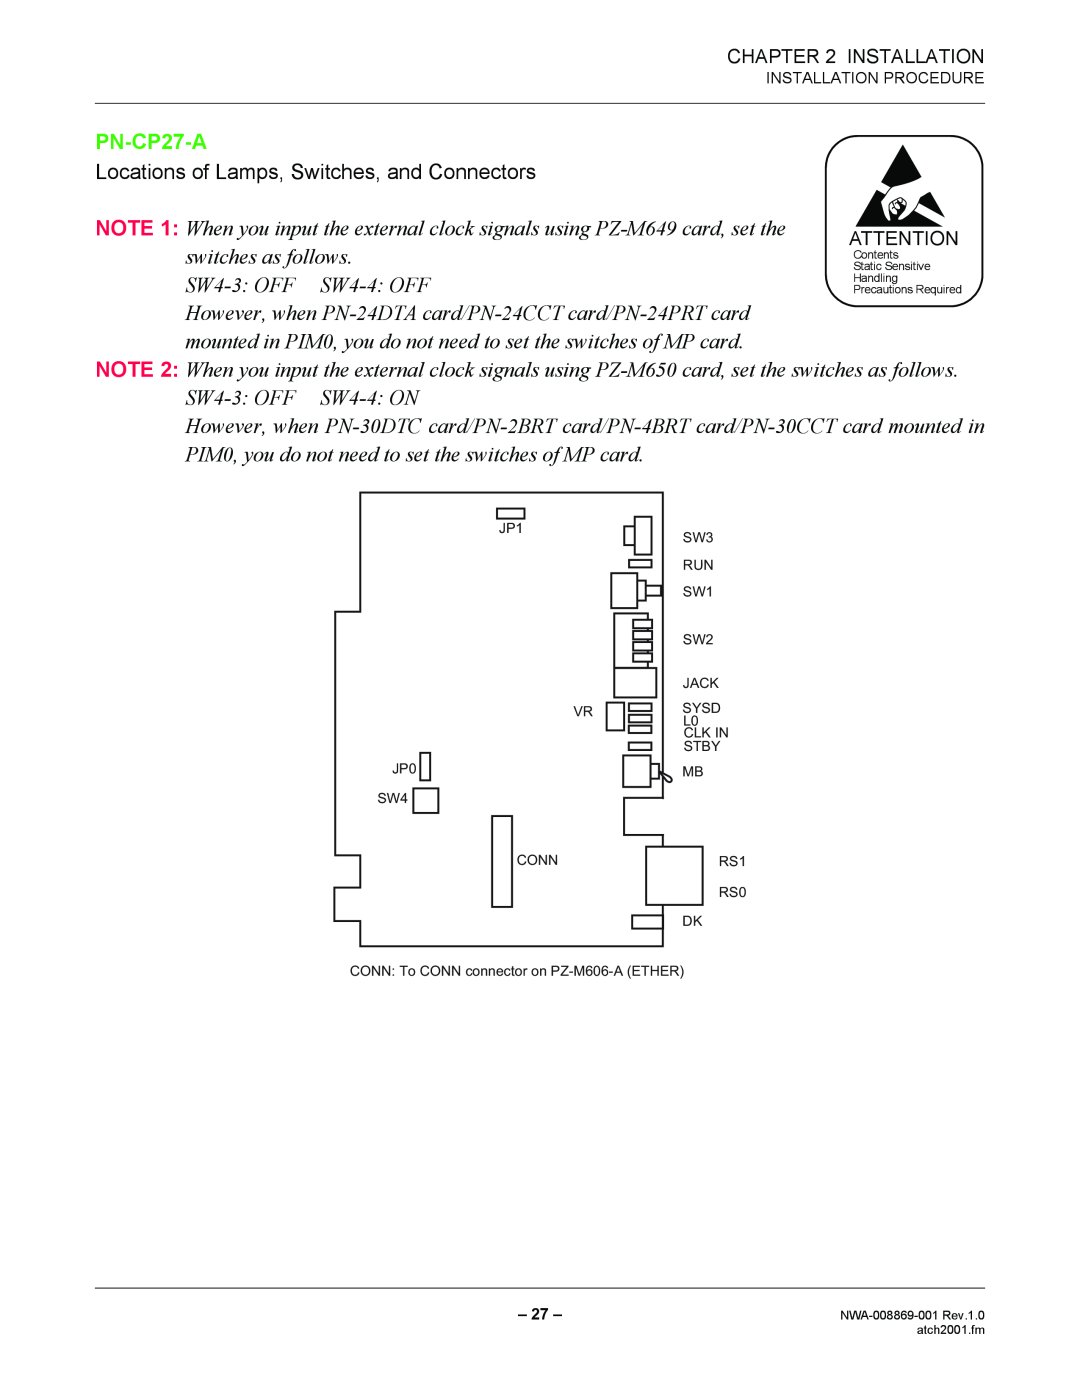 NEC NWA-008869-001 manual PN-CP27-A, Locations of Lamps, Switches, and Connectors 